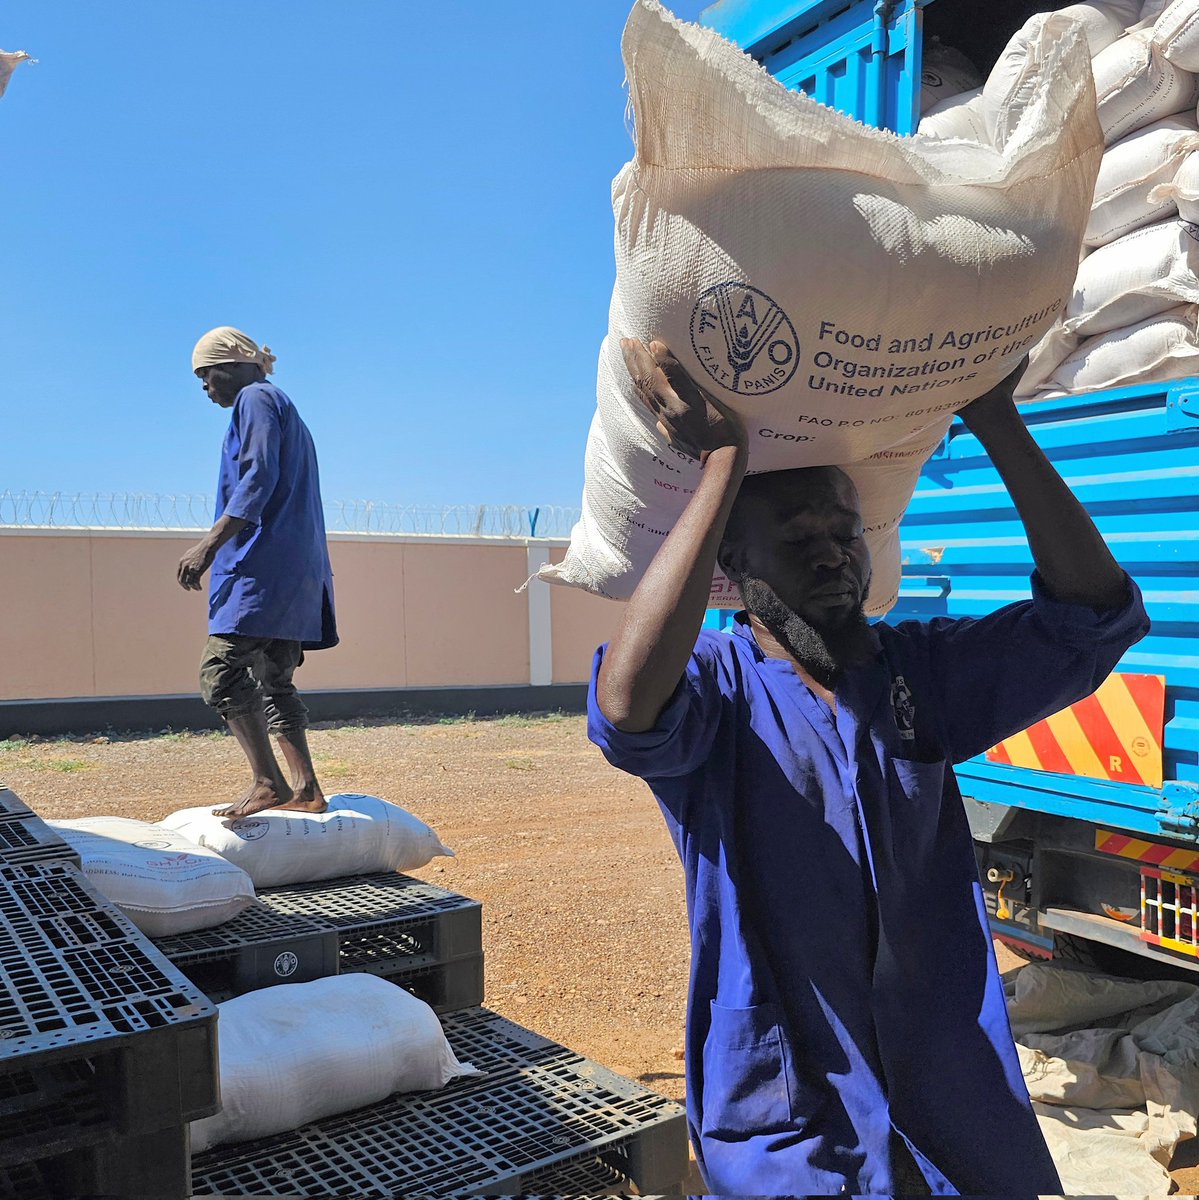 Thanks to the support from our donors, we are delivering #Seeds 🌱🌽🫘 and farming tools ⛏️ to farmers during this year’s main season to assist food production. @FAO will continue supporting the people of #SouthSudan 🇸🇸 to fight for #FoodSecurity.